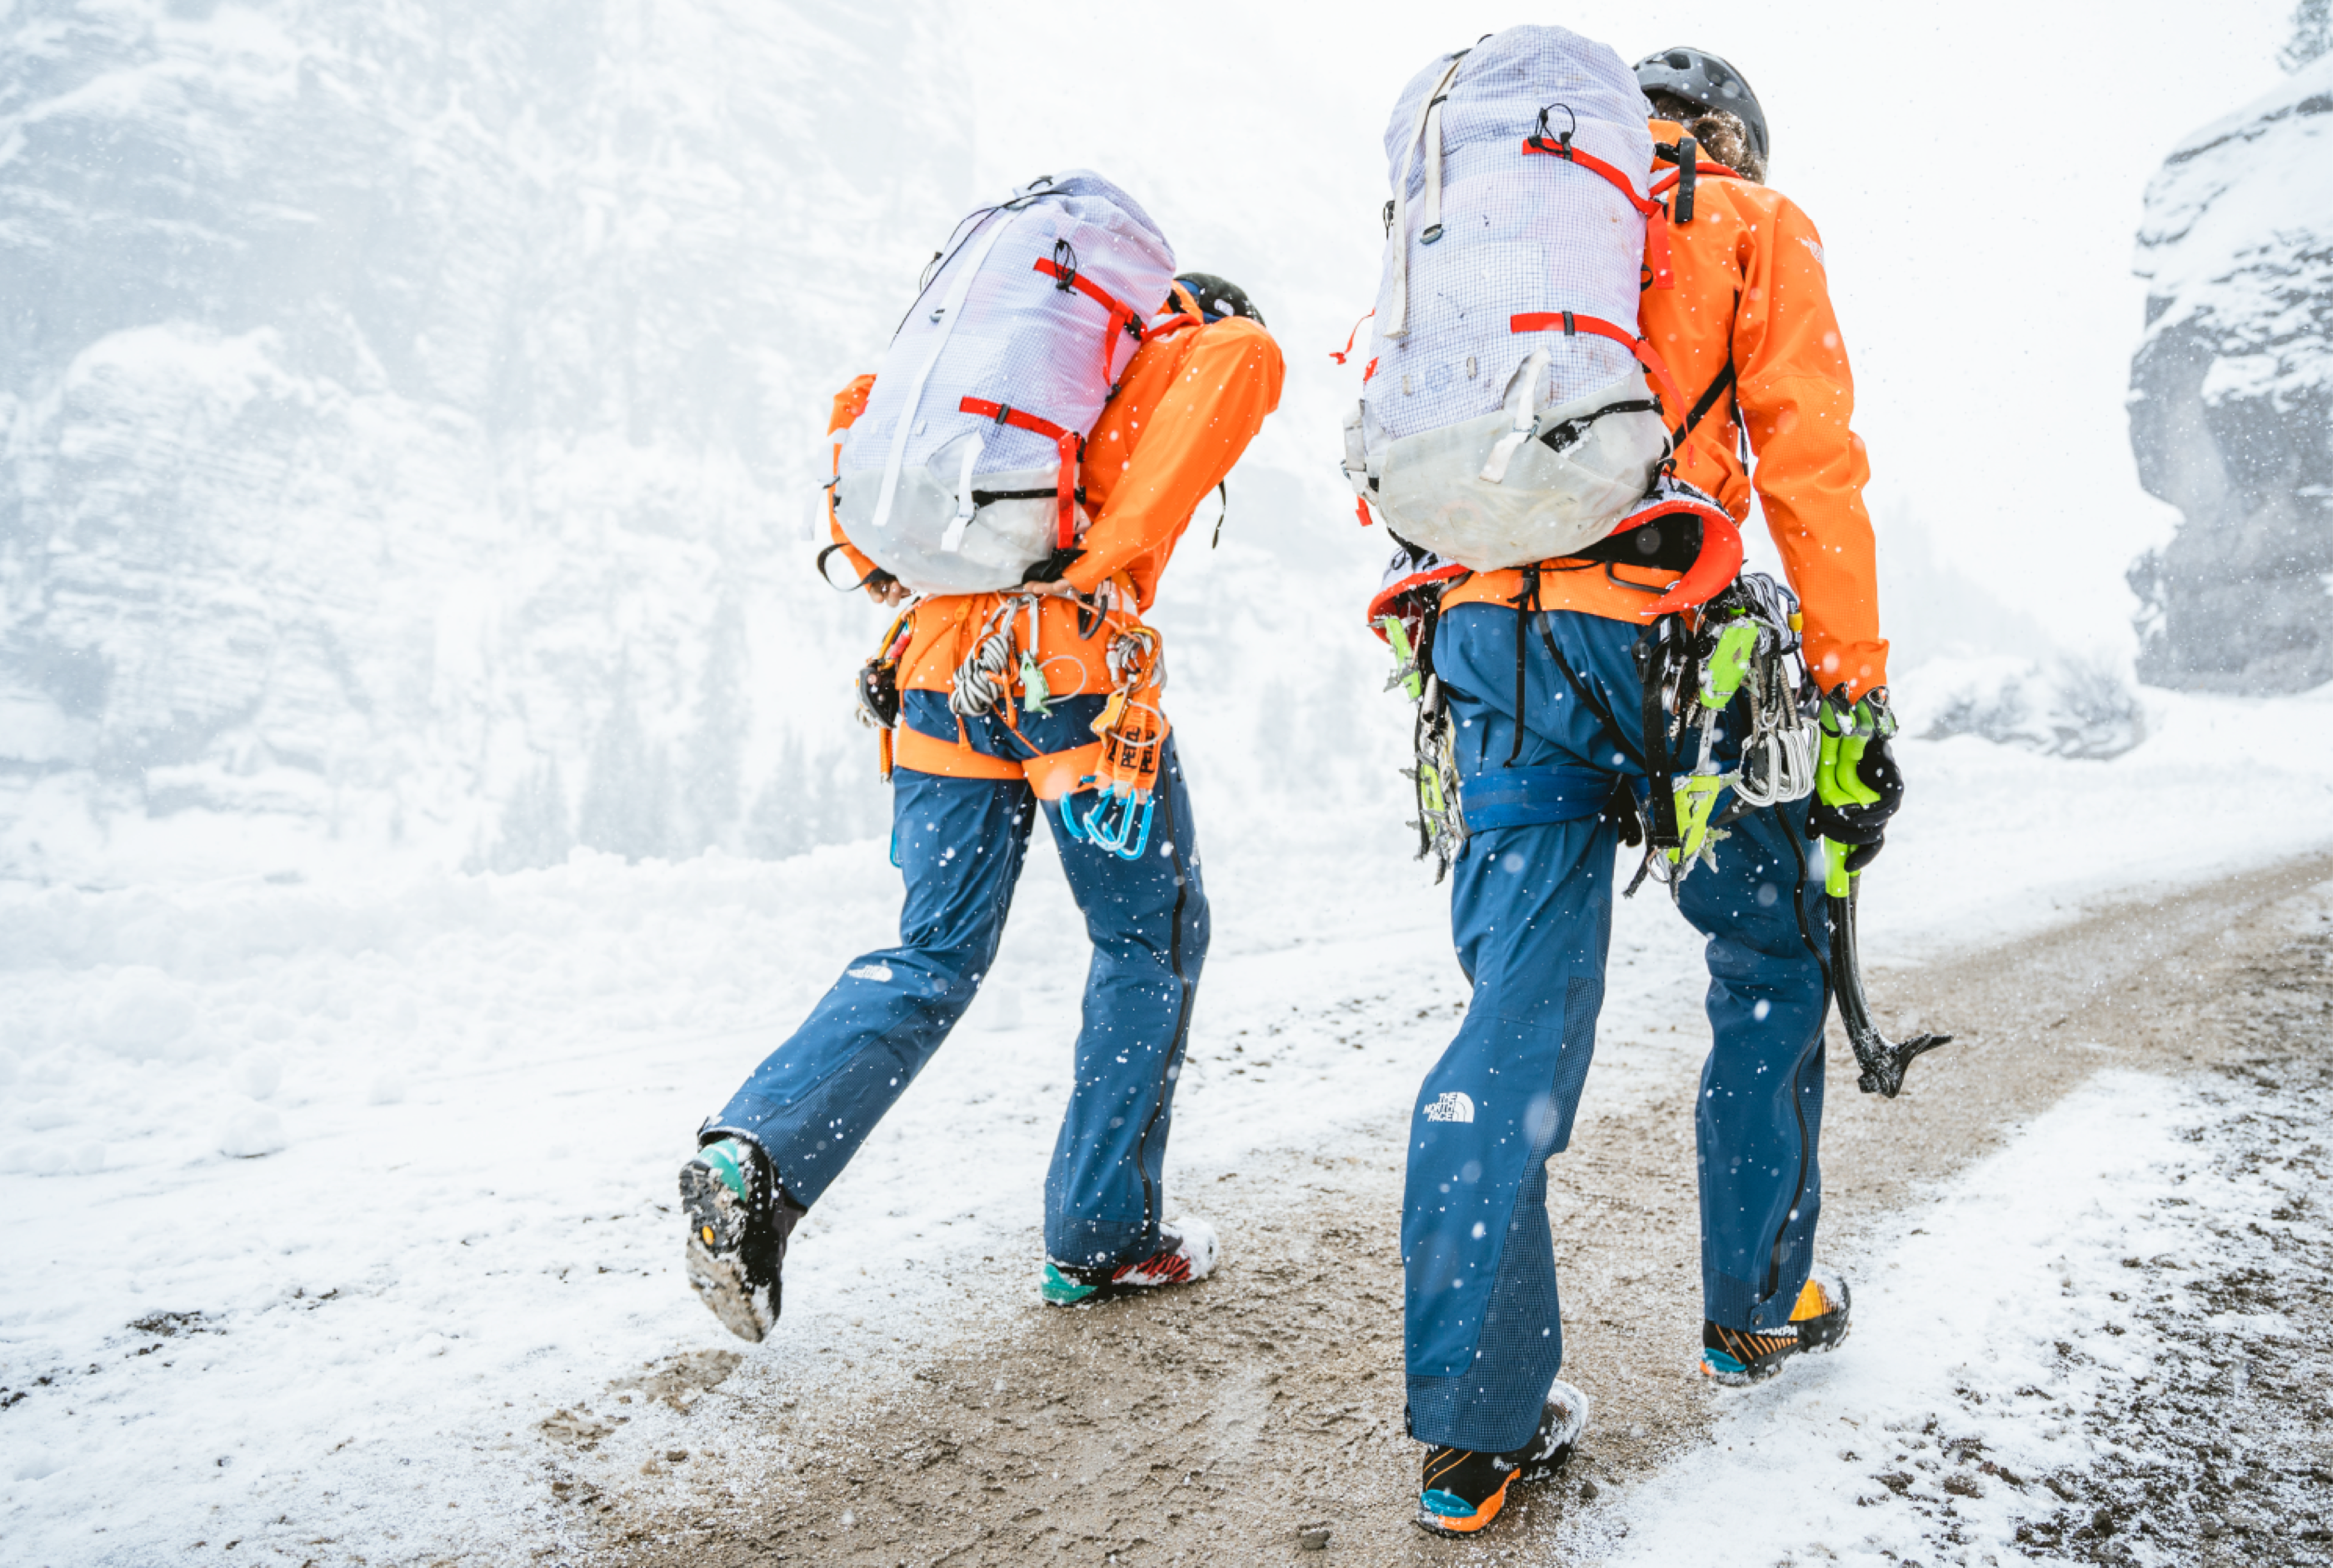 Two geared-up mountaineers walk confidently into icy winter conditions in the high-alpine.